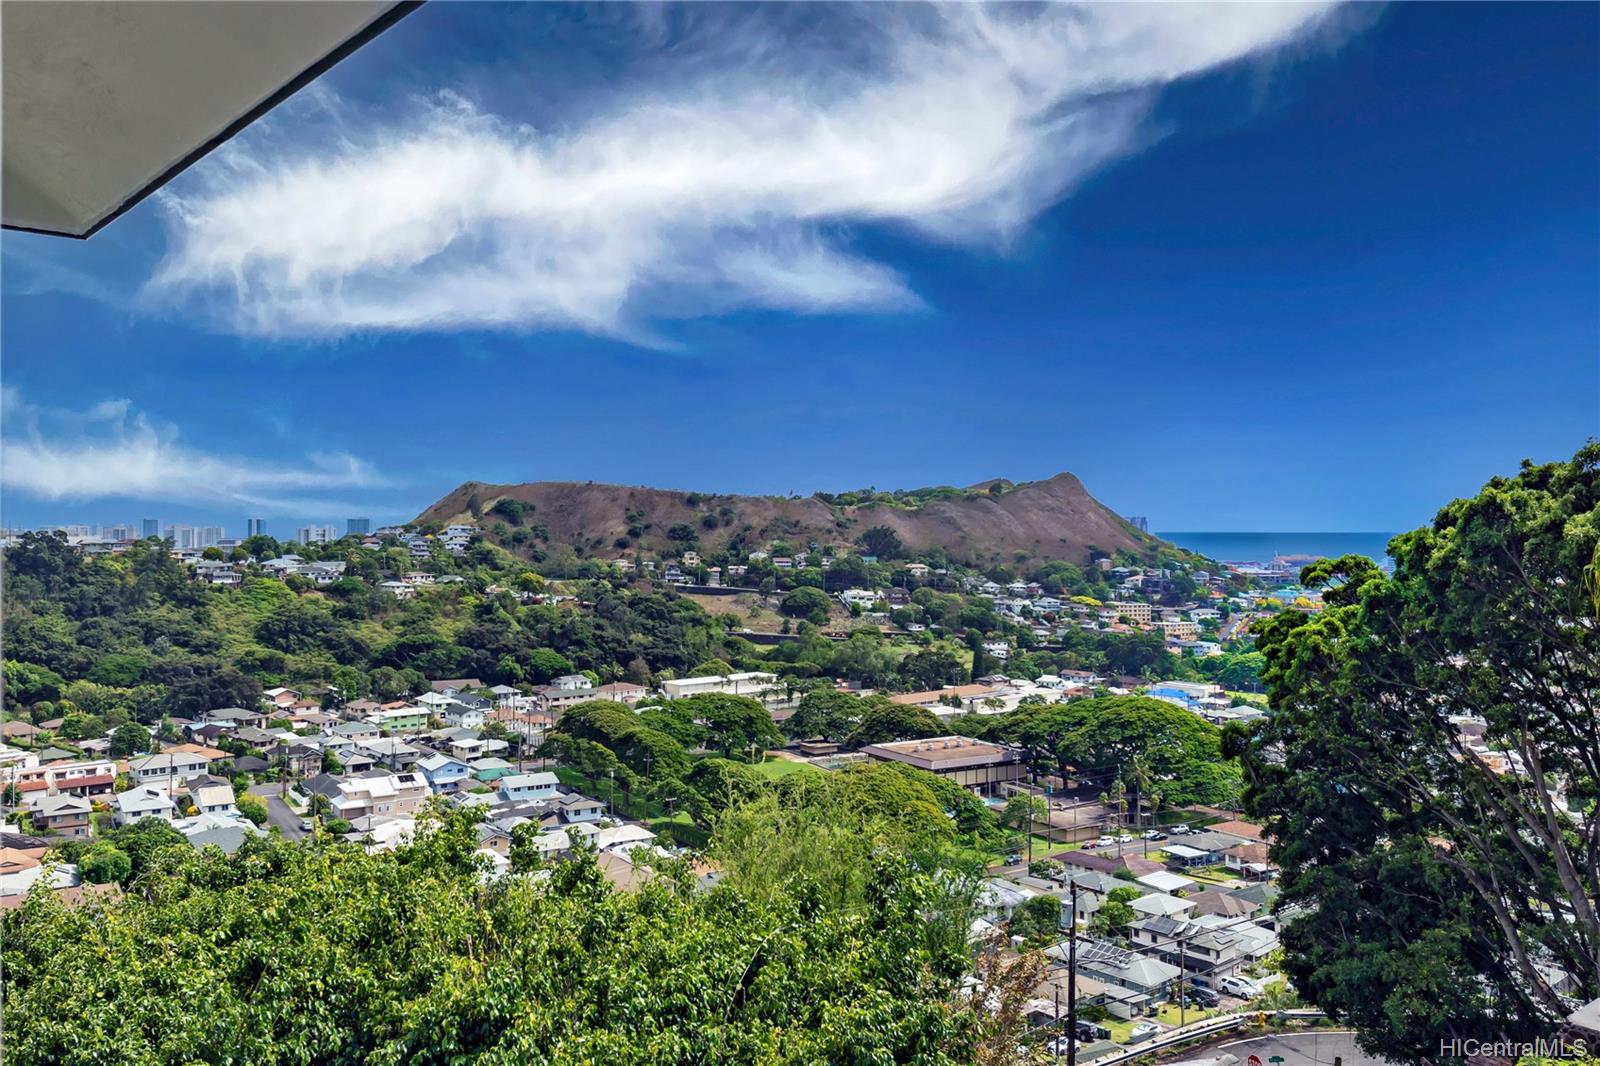 2516 Pacific Hts Road Honolulu - Multi-family - photo 2 of 25